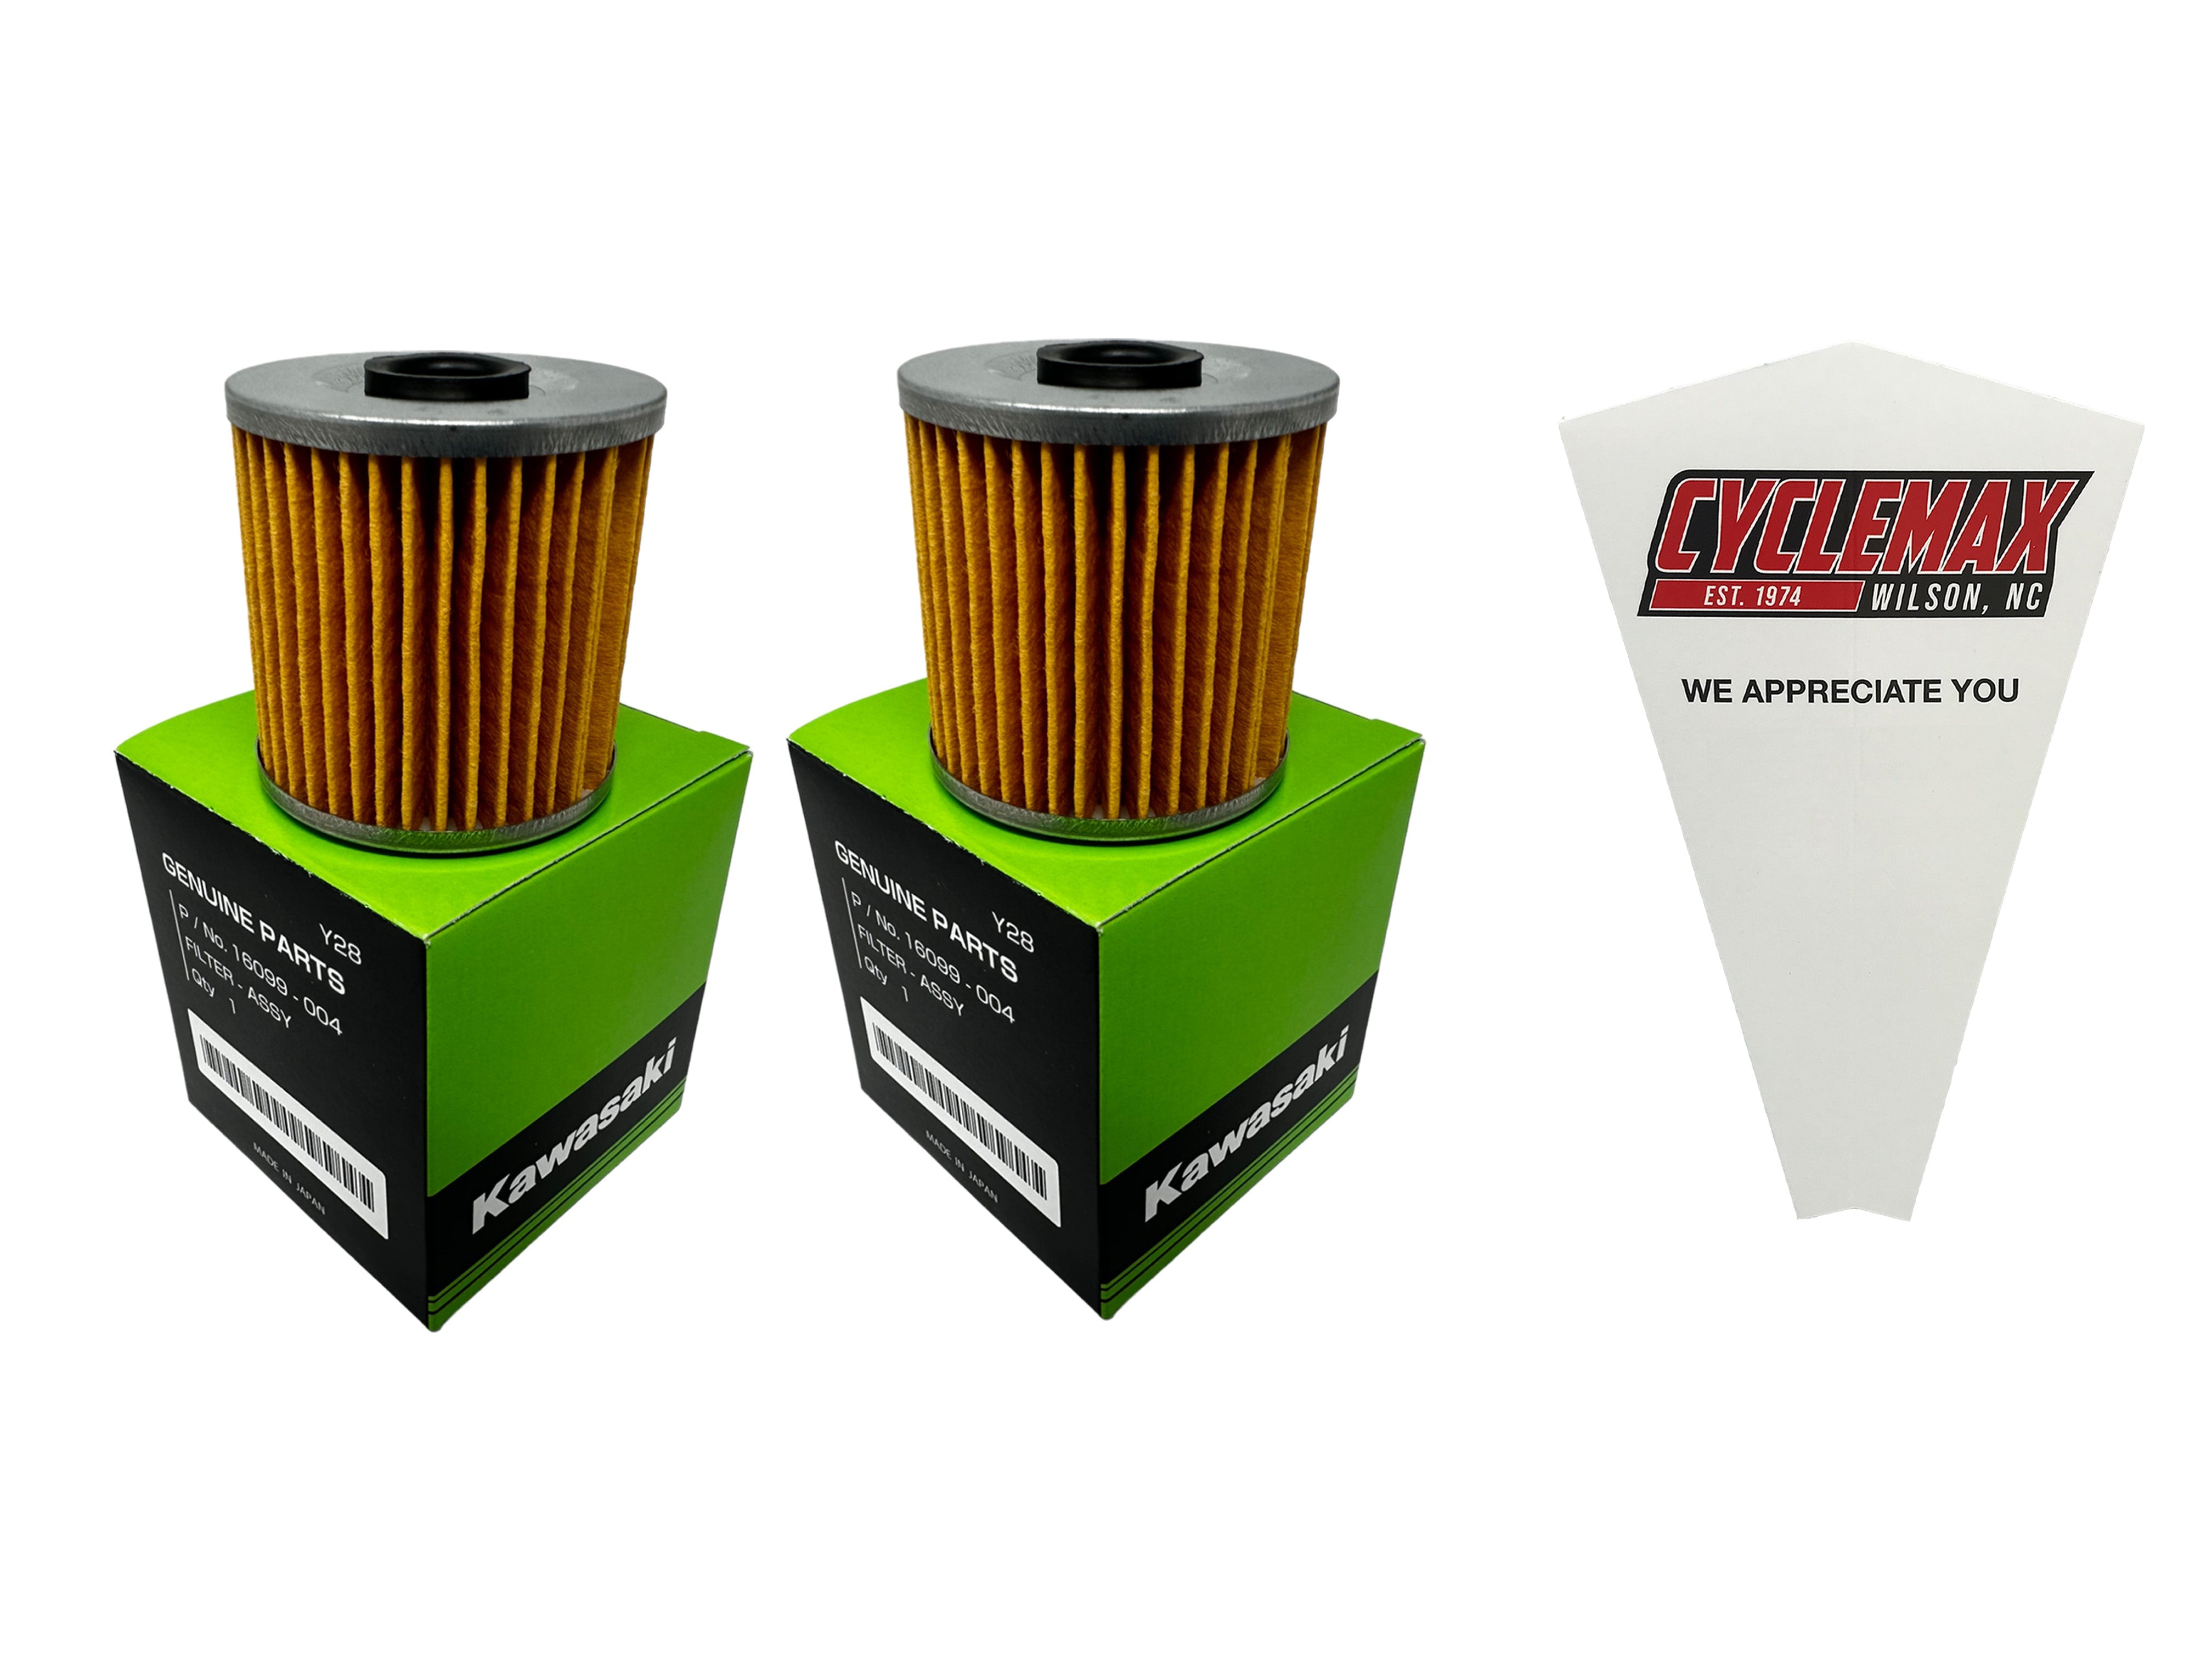 Cyclemax Two Pack for Kawasaki Oil Filter 16099-004 Contains Two Filters and a Funnel